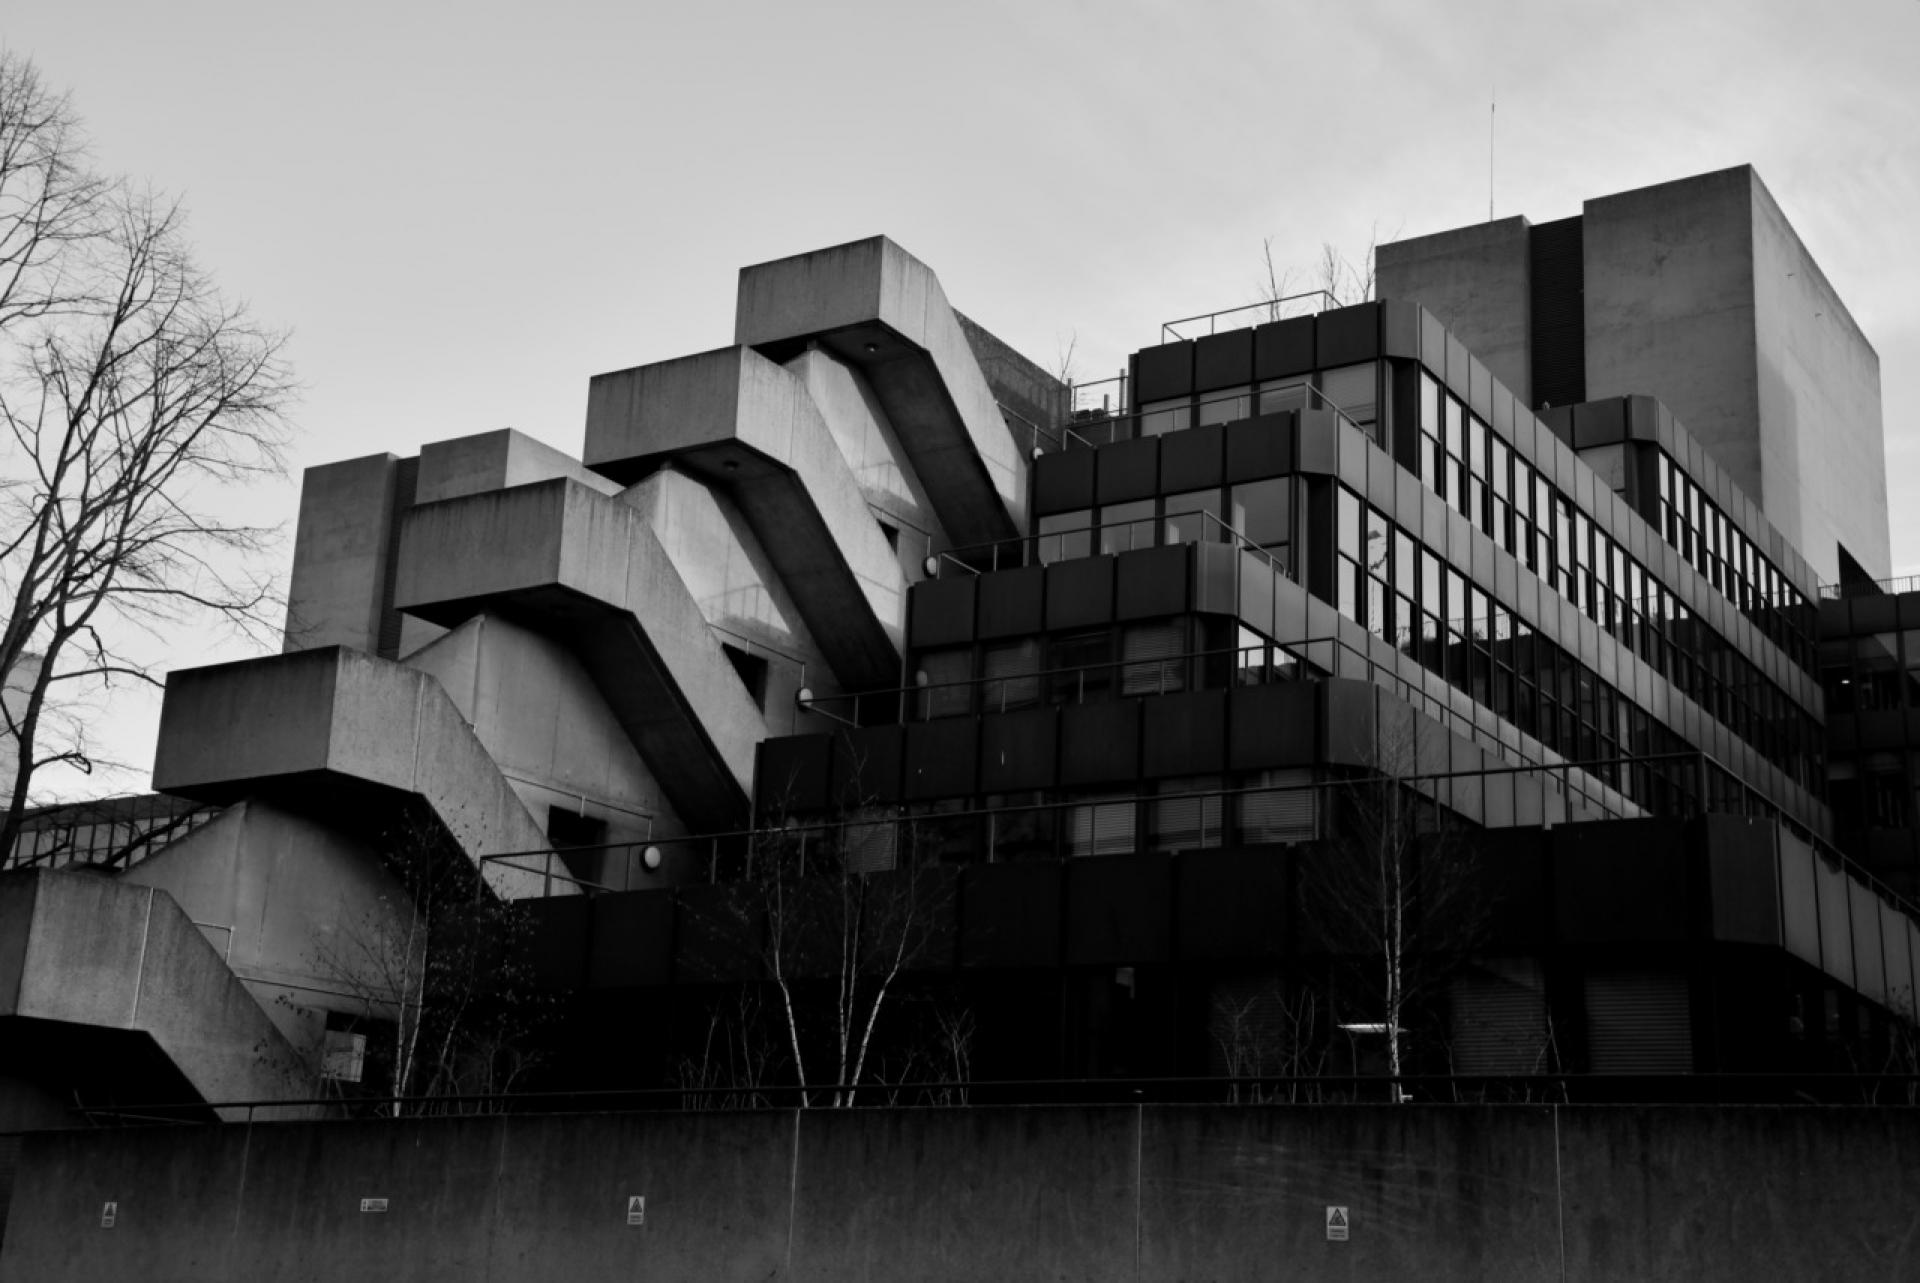 Institute of Education by Denys Lasdun (1970)